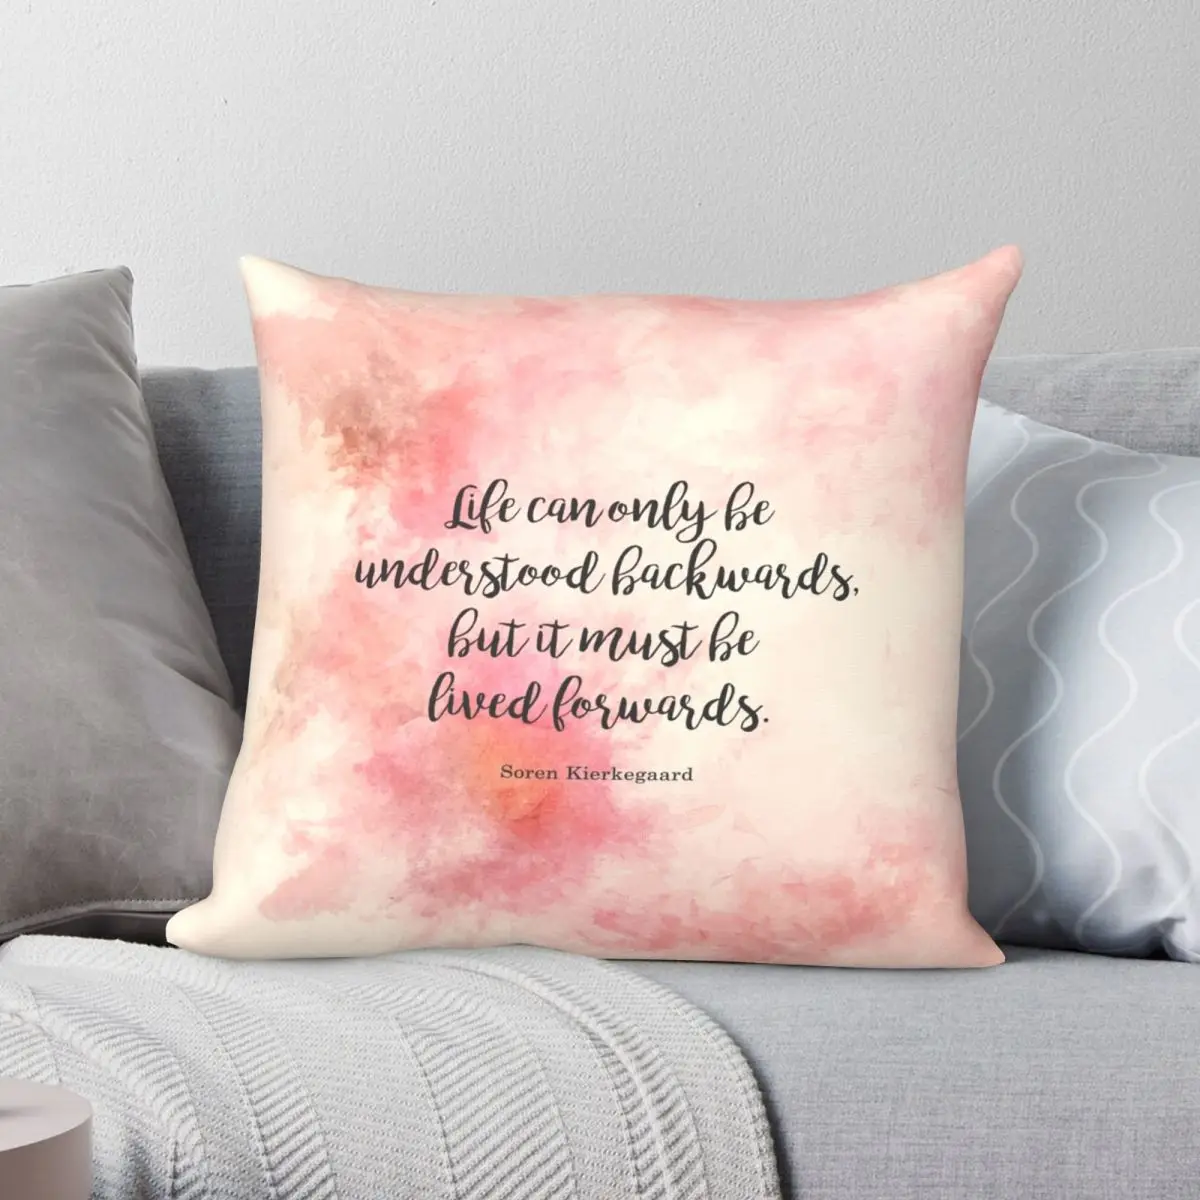 

Life Can Only Be Understood Backwards Square Pillowcase Polyester Linen Velvet Printed Decor Throw Pillow Case Room Cushion